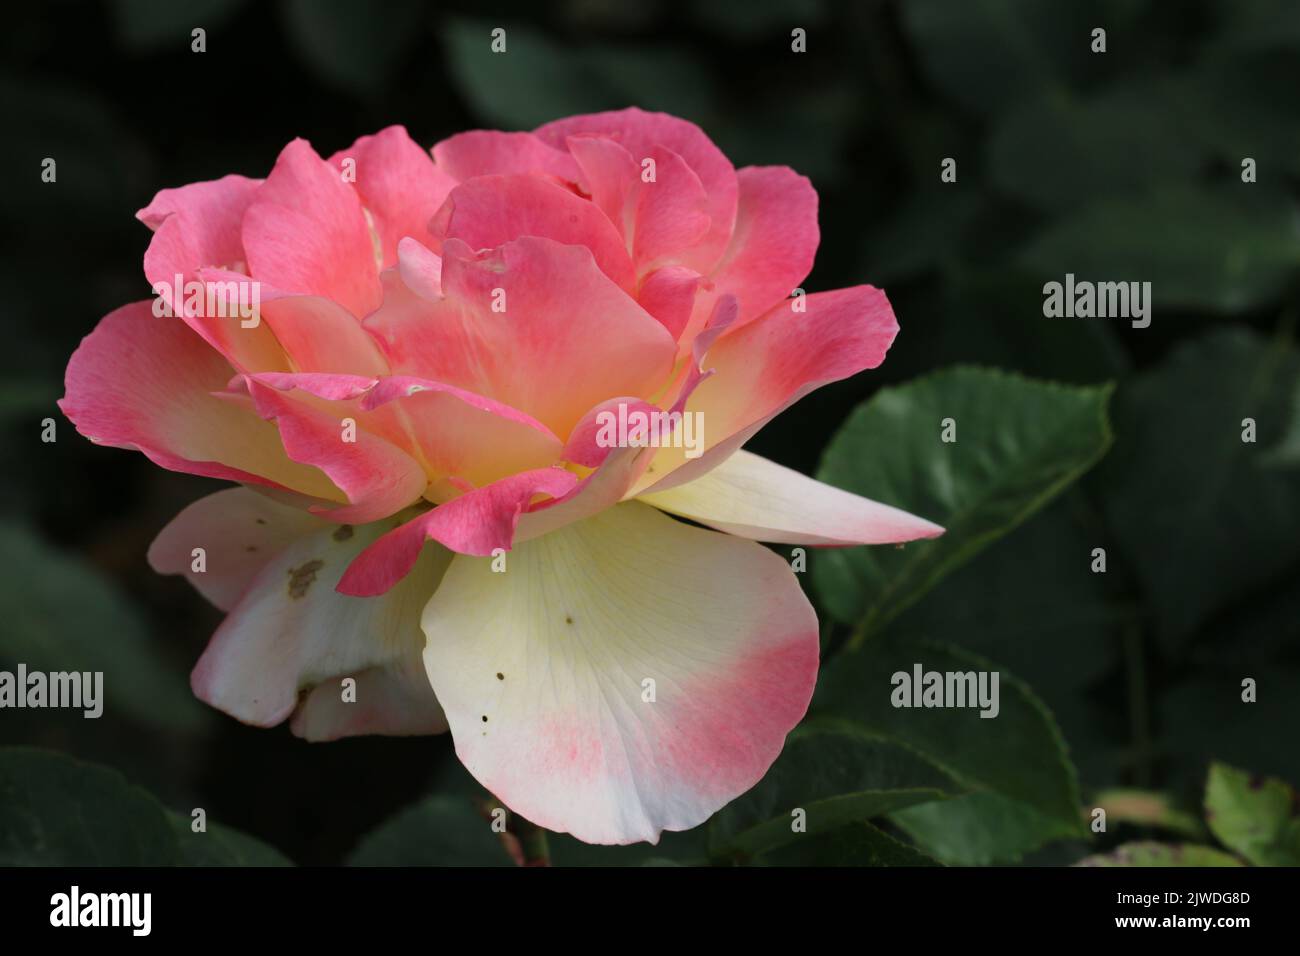 Pink rose flower in close up Stock Photo